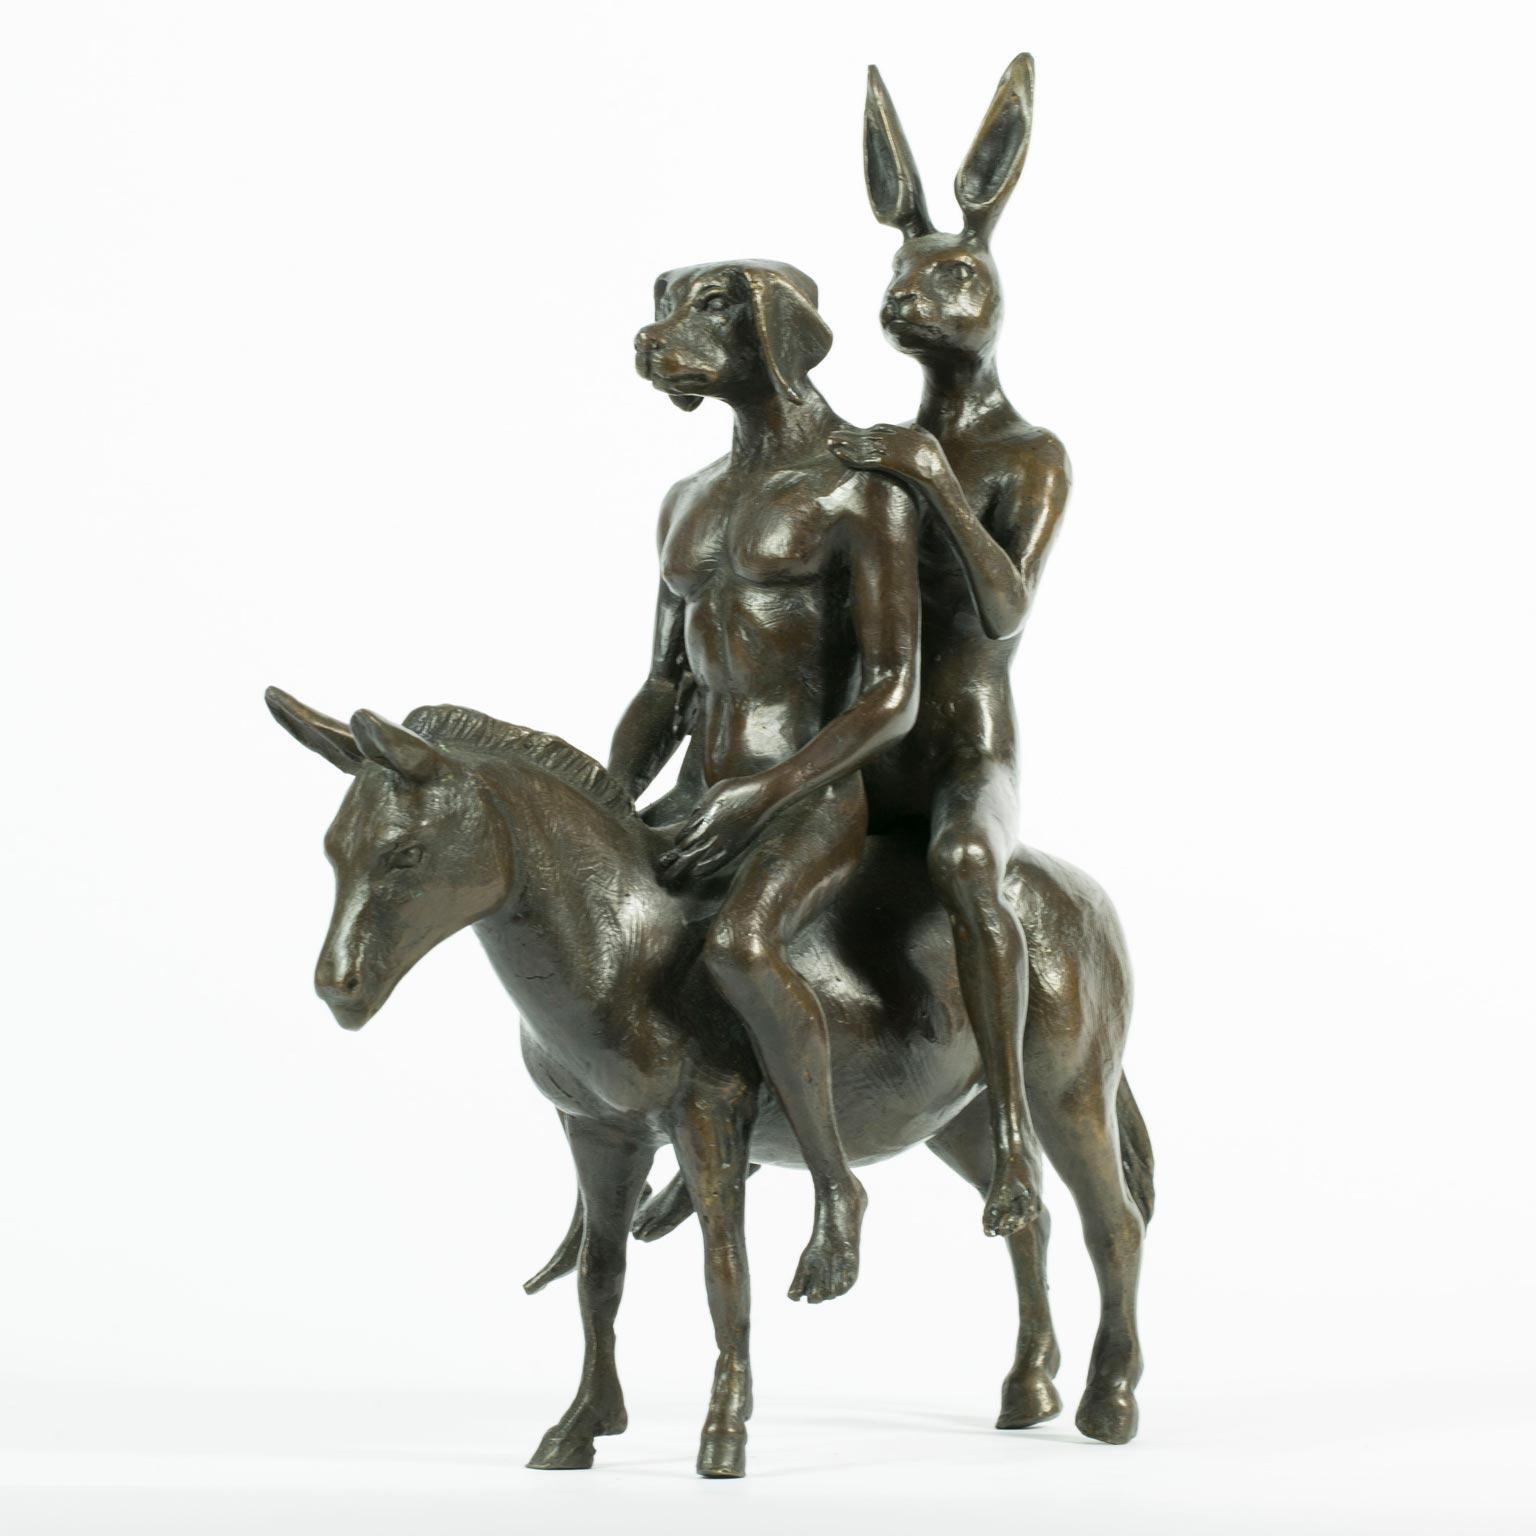 Authentic Limited Edition Bronze Travellers Arrived Sculpture - Gillie and Marc - Art by Gillie and Marc Schattner